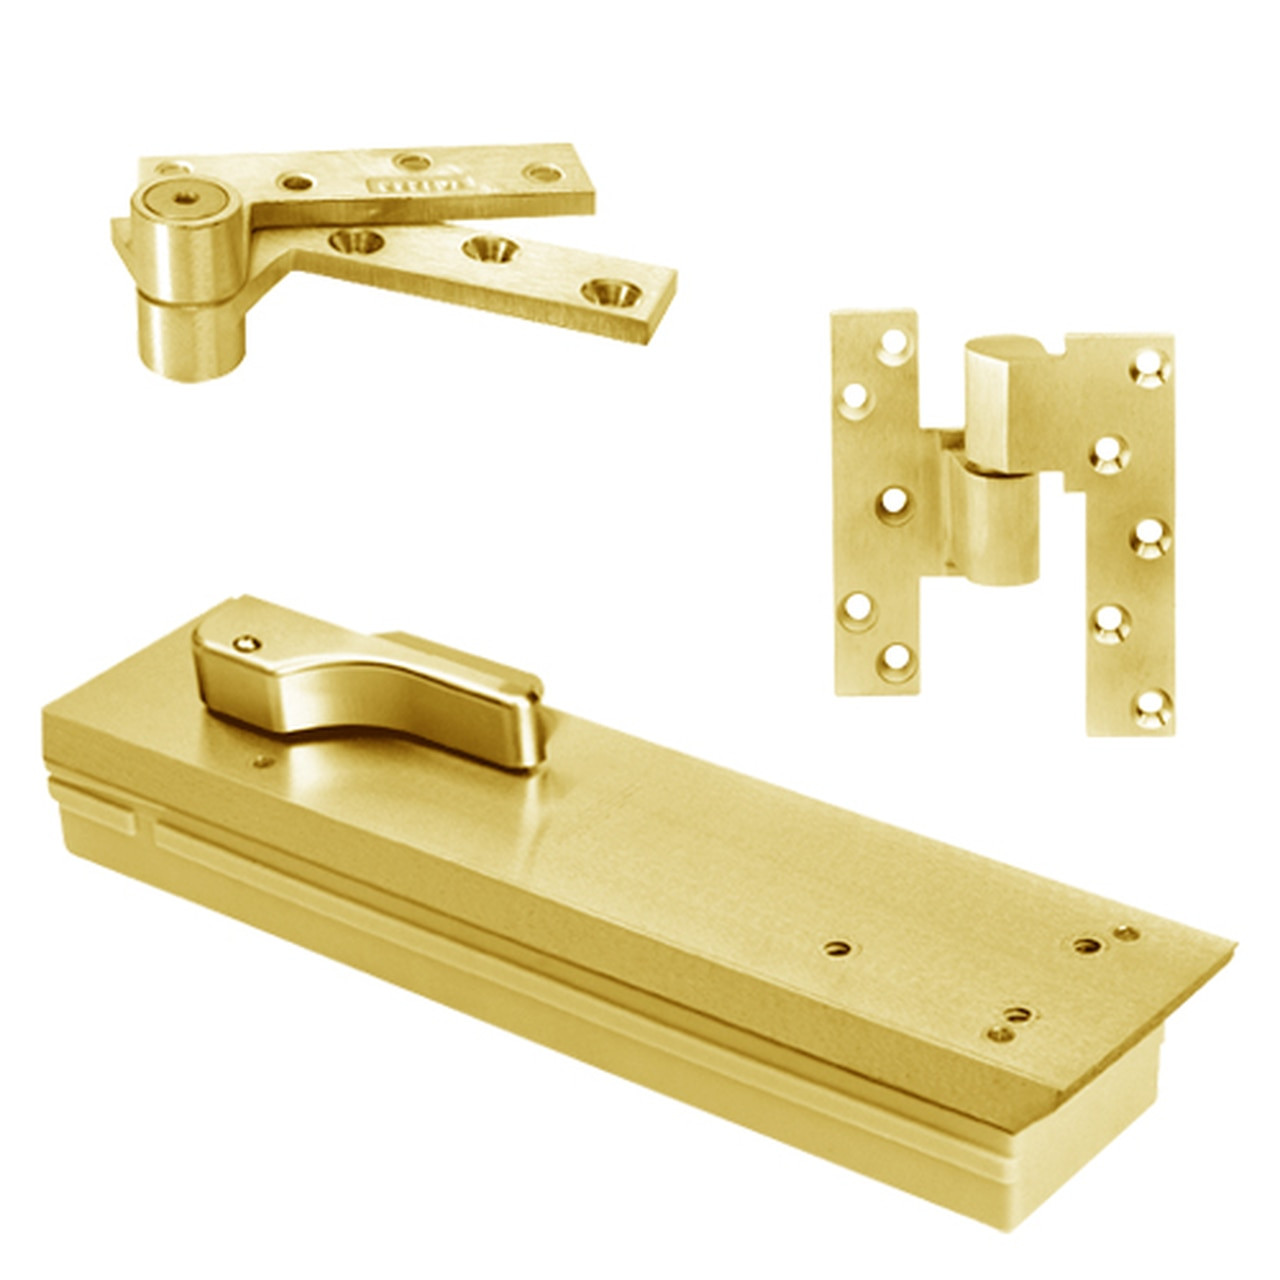 FQ5103NBC-LFP-LCC-RH-605 Rixson Q51 Series Fire Rated 3/4" Offset Hung Shallow Depth Floor Closers in Bright Brass Finish